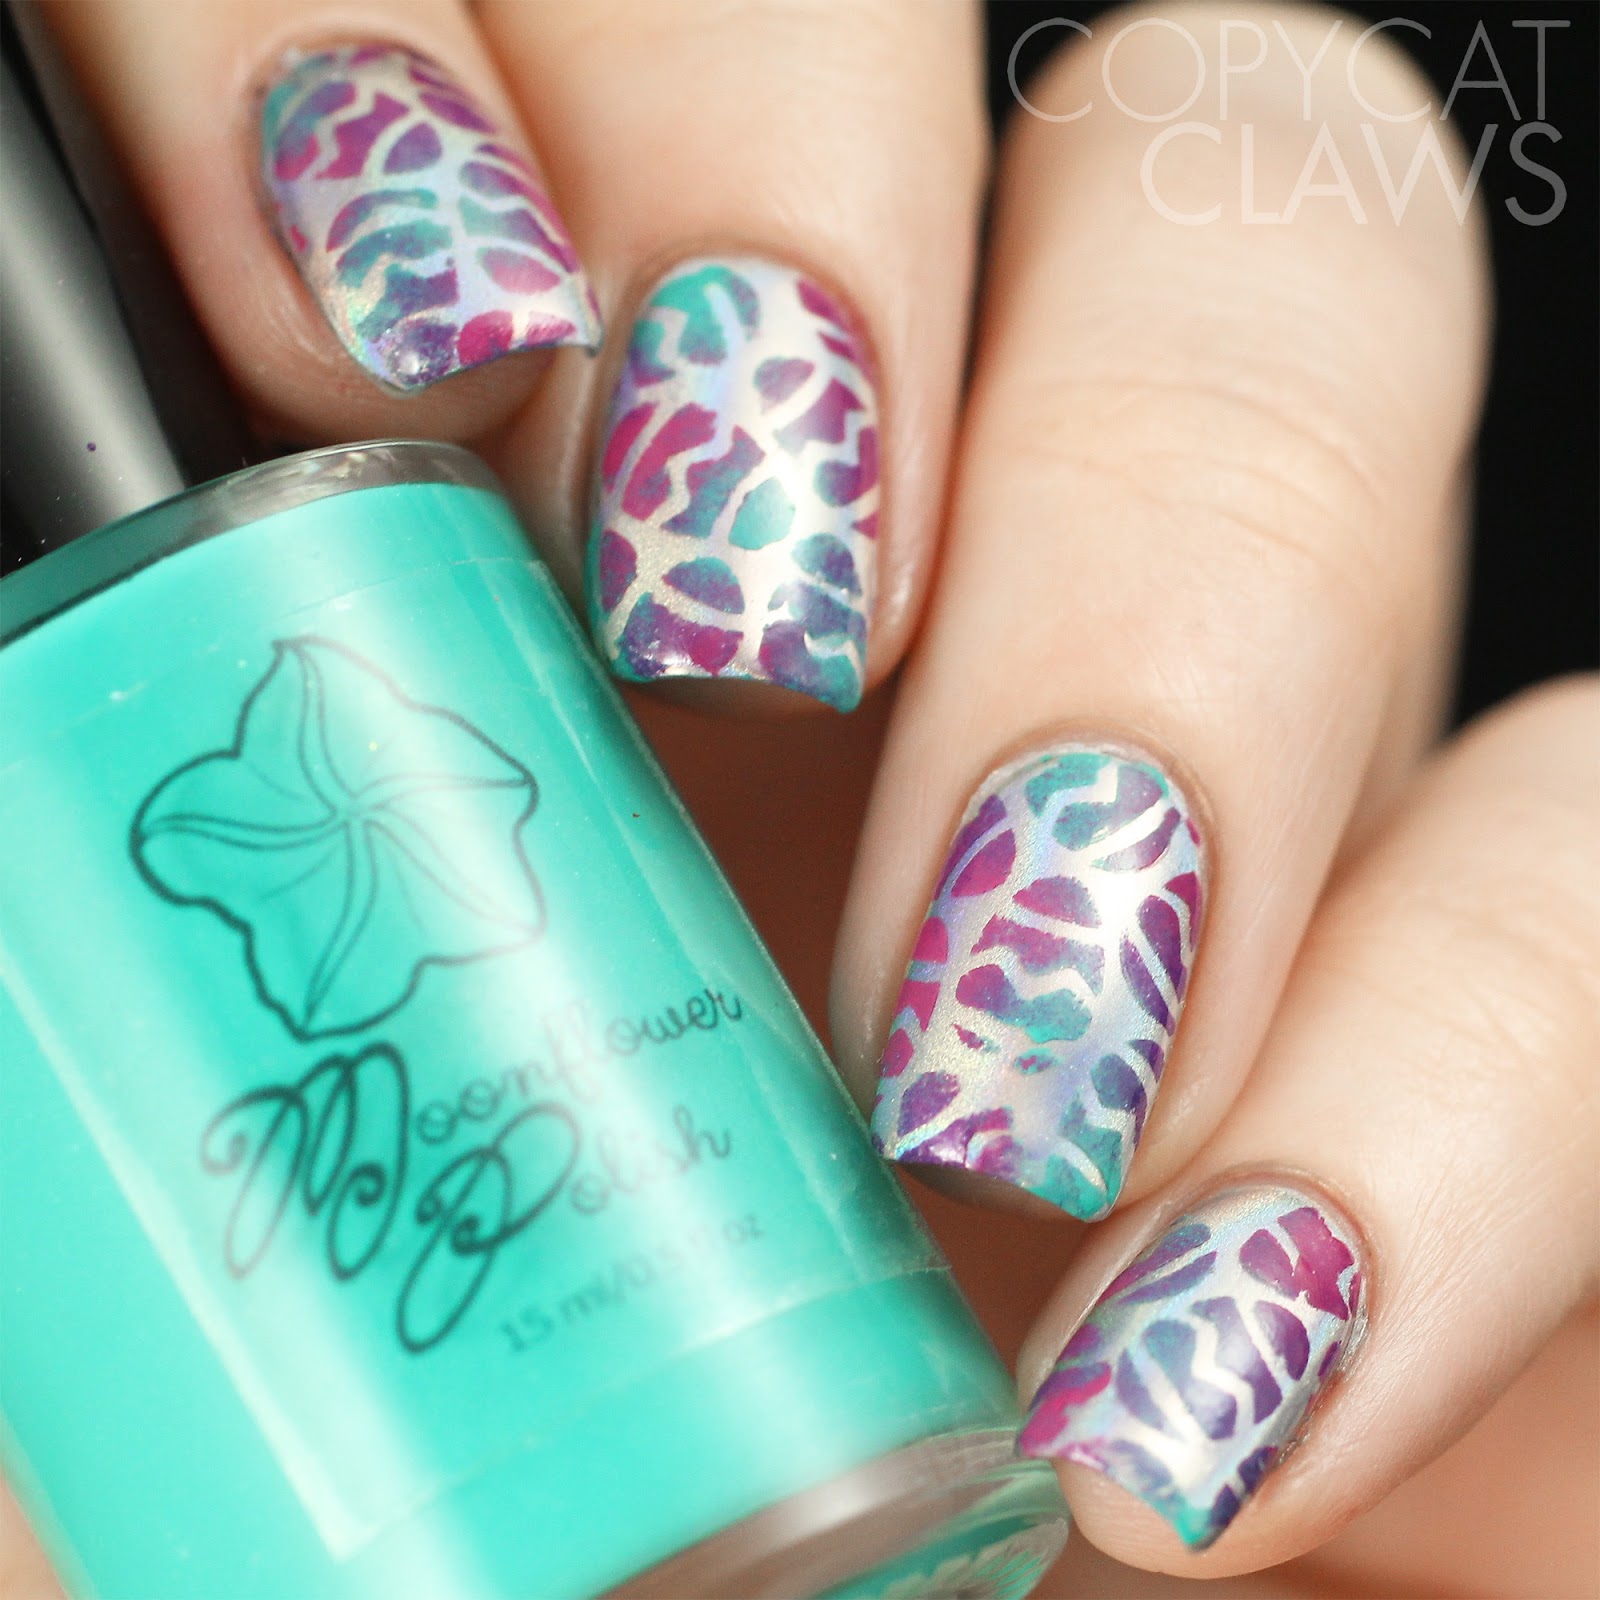 Copycat Claws: What's Up Nails Holographic Powder and Easter Nail Stencils